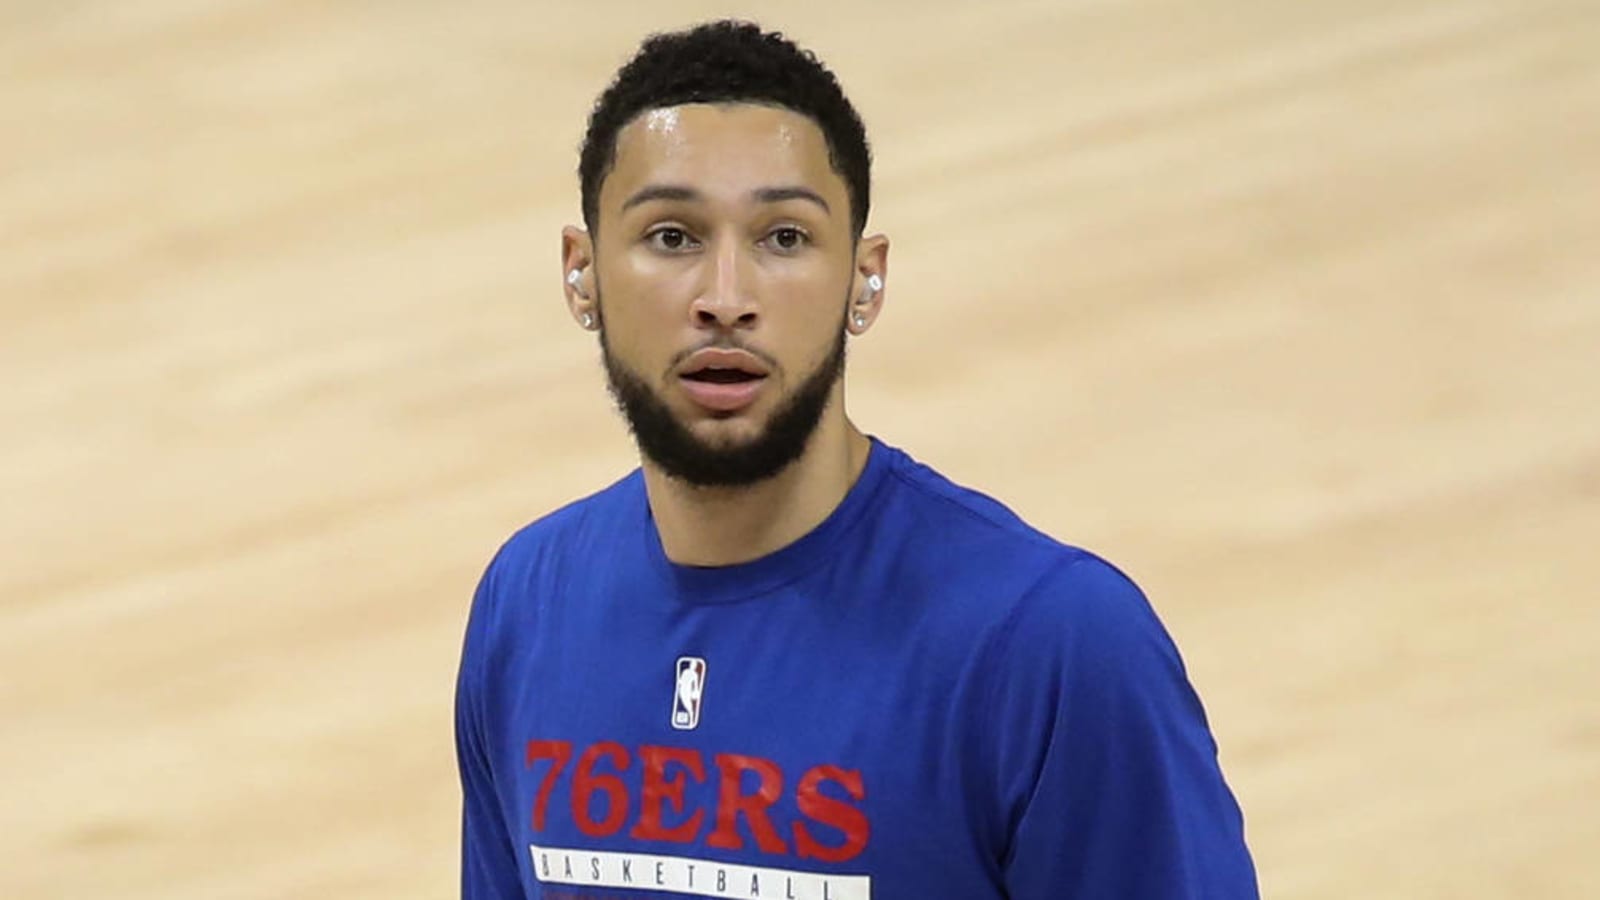 Pacers spoke with 76ers about potential trade for Ben Simmons